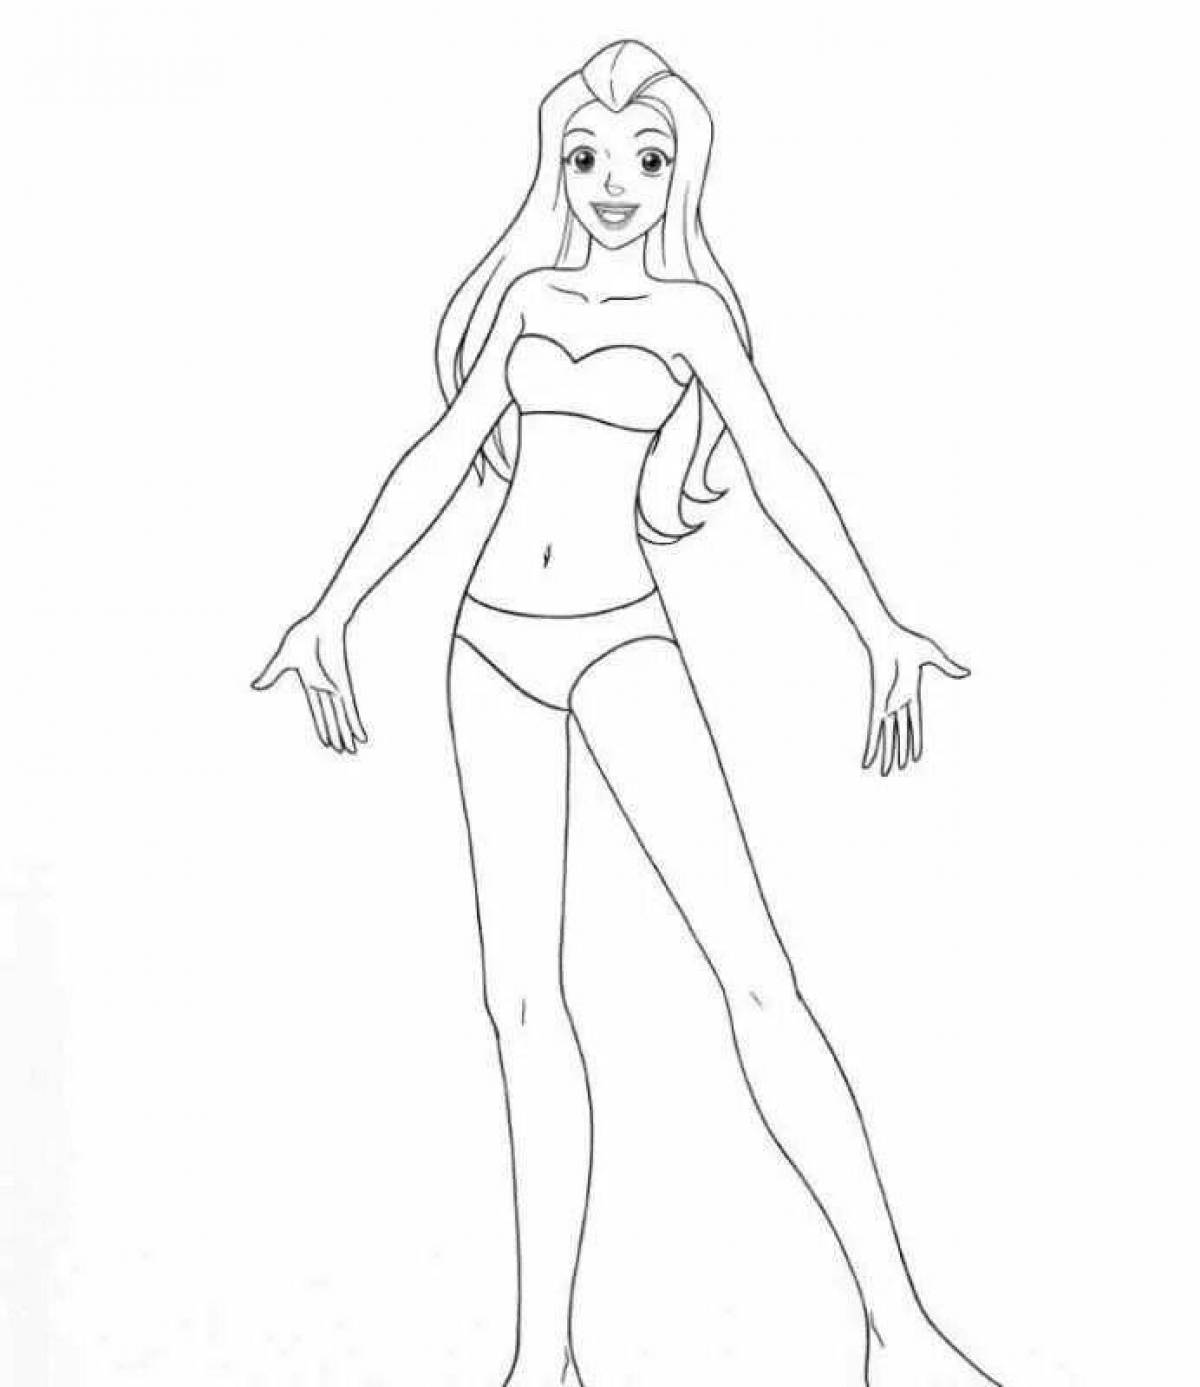 Coloring page elegant barbie in a bathing suit